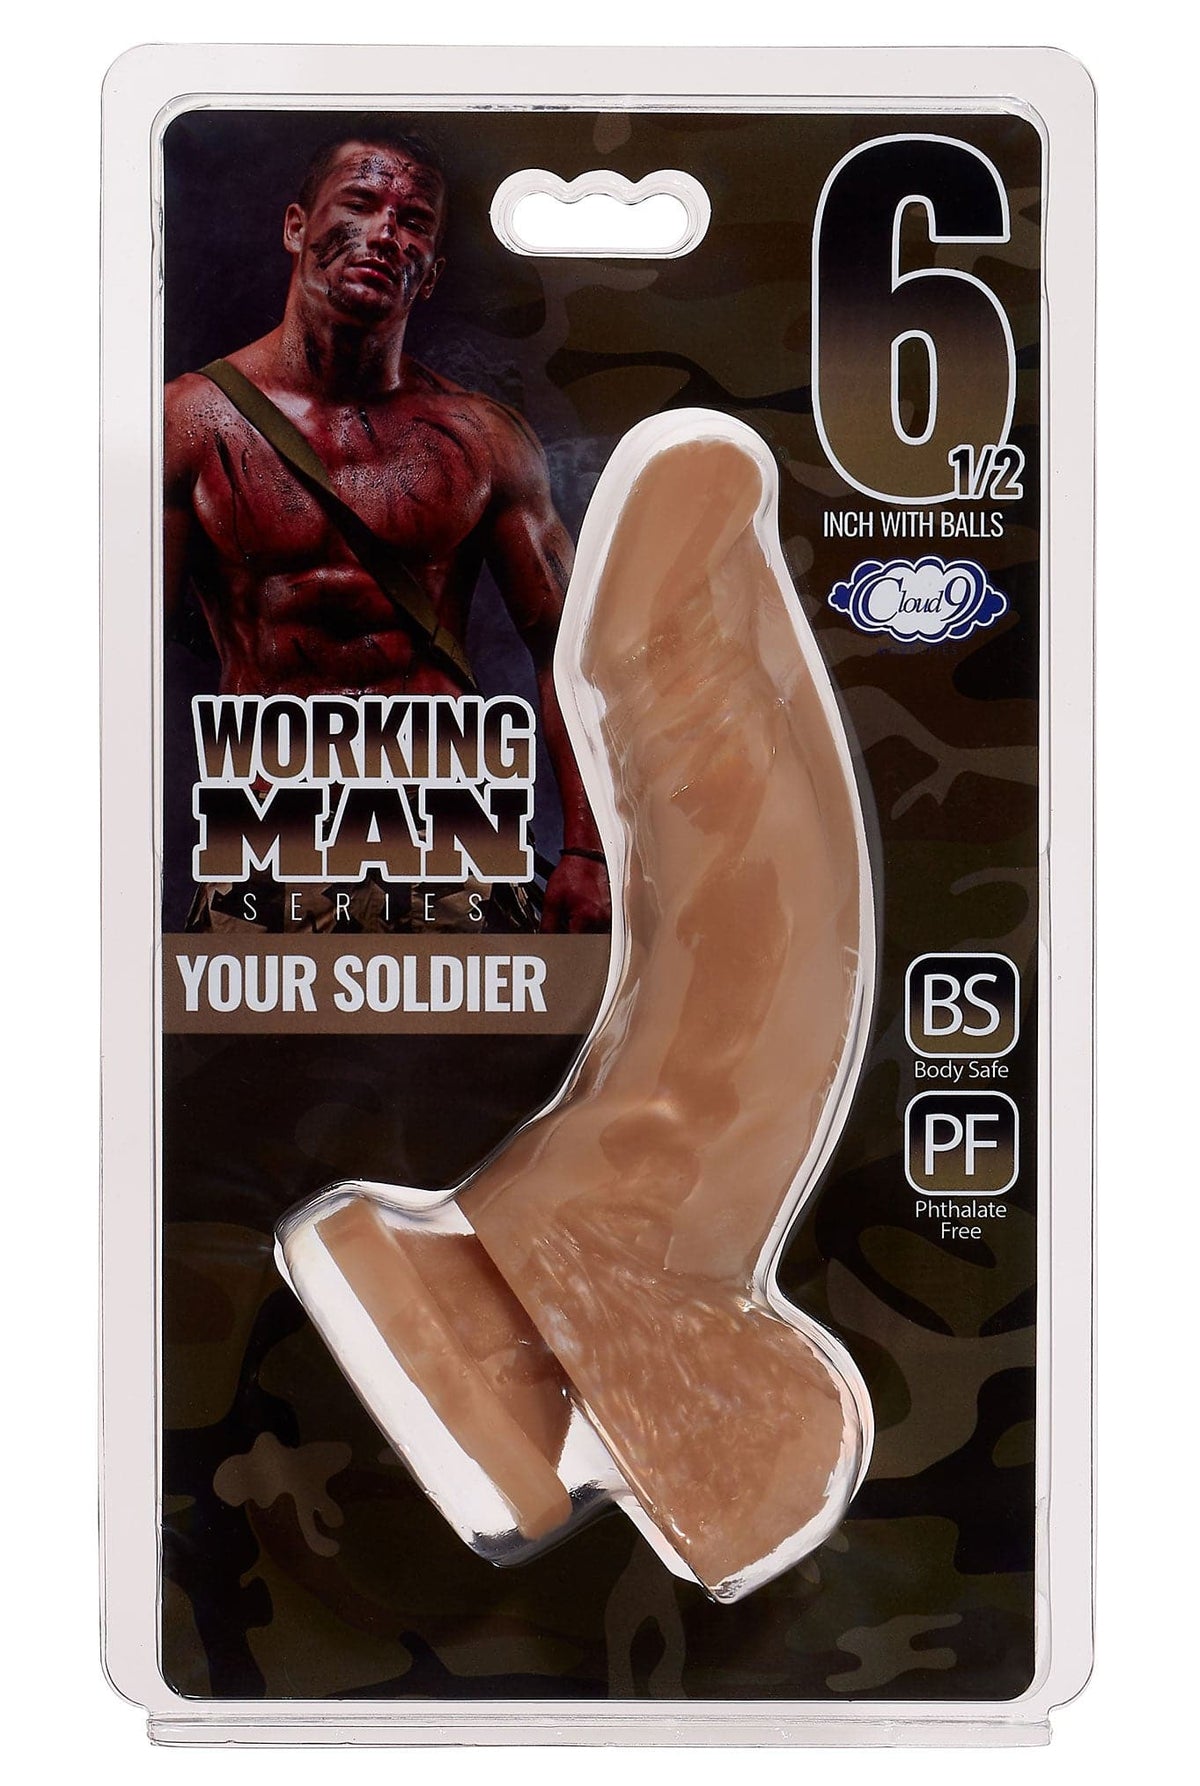 cloud 9 working man 6 5 inch with balls your soldier tan